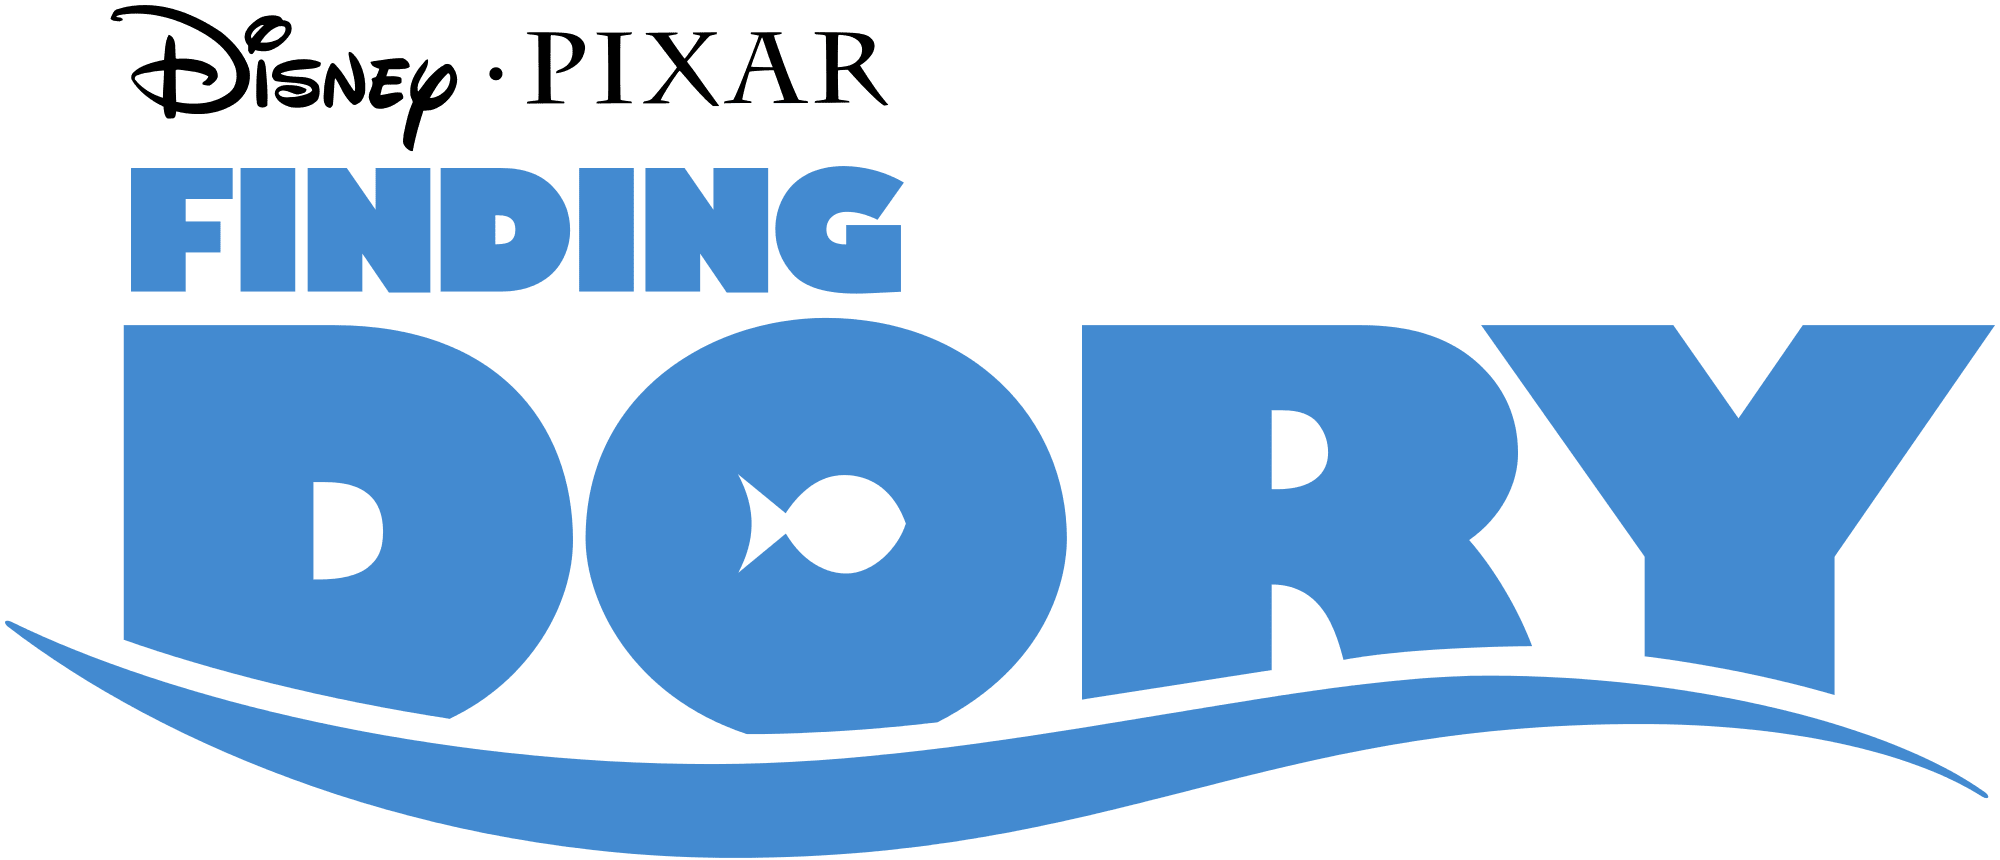 2000px-Finding_Dory.svg